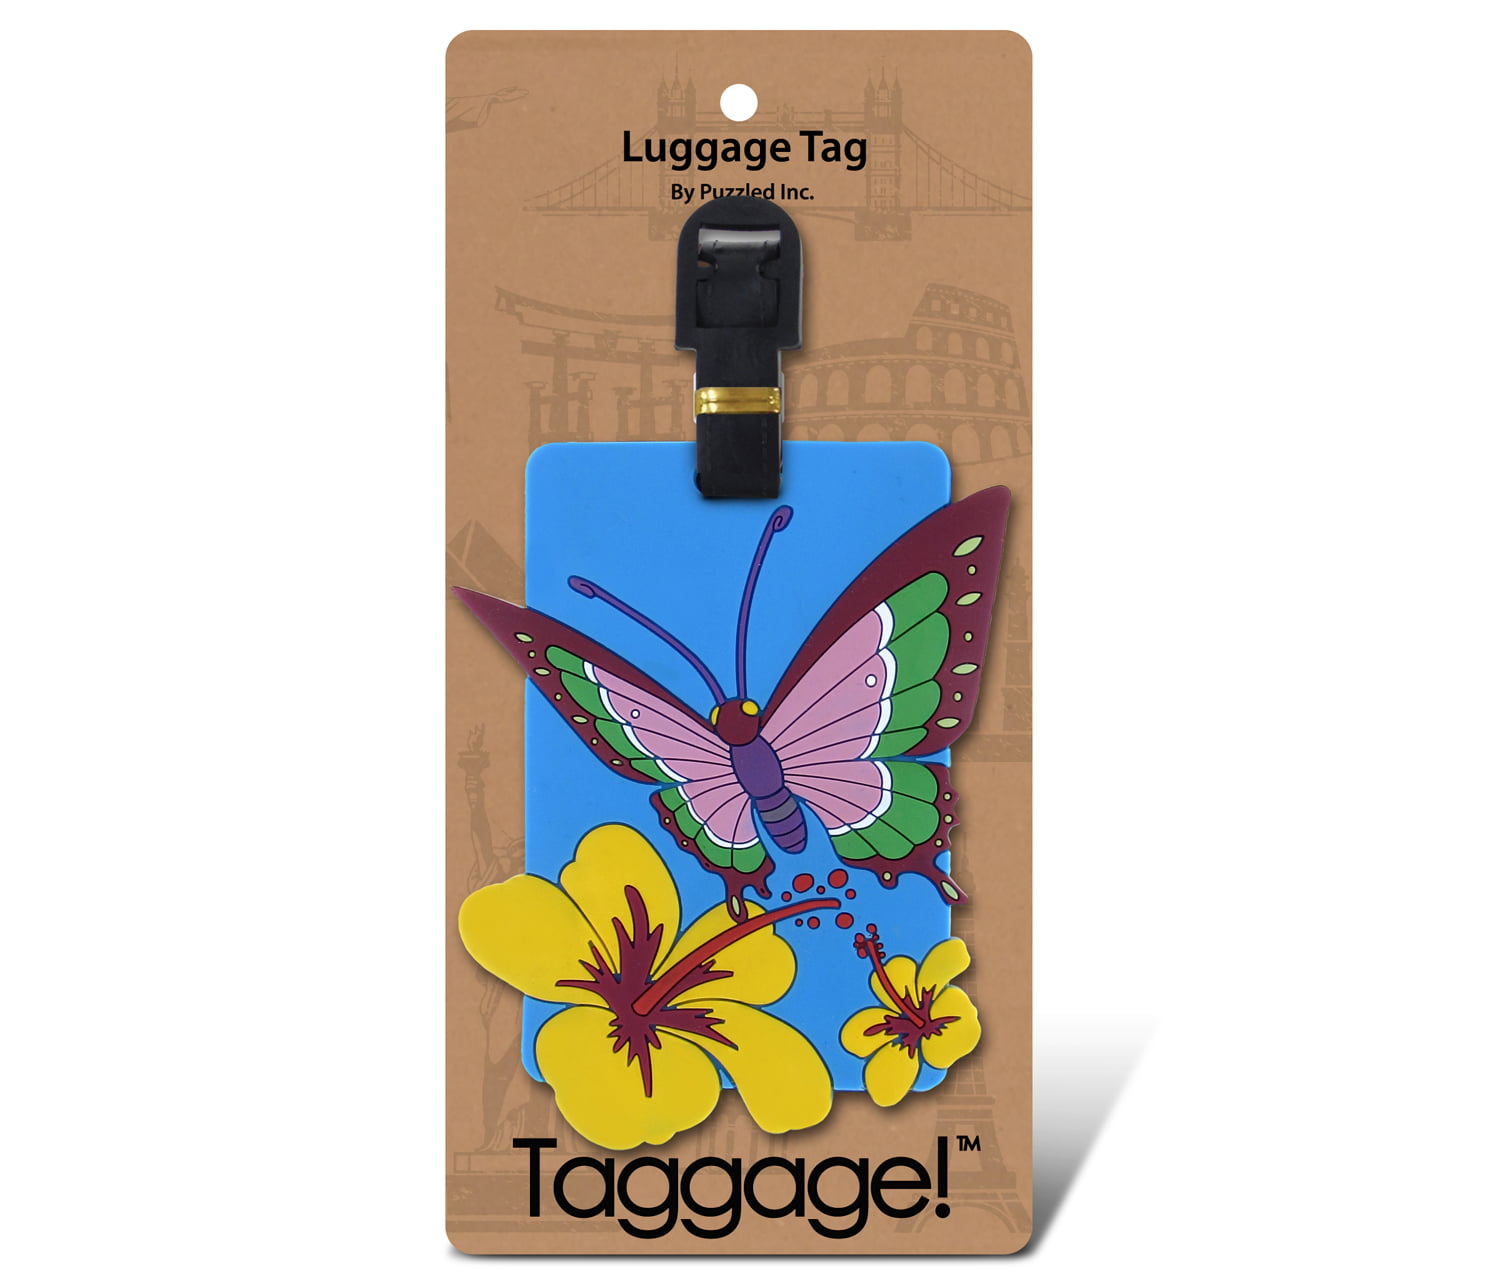 Coloranimal Travel Accessories Luggage Tags Animal Butterfly Pattern Suitcase Labels